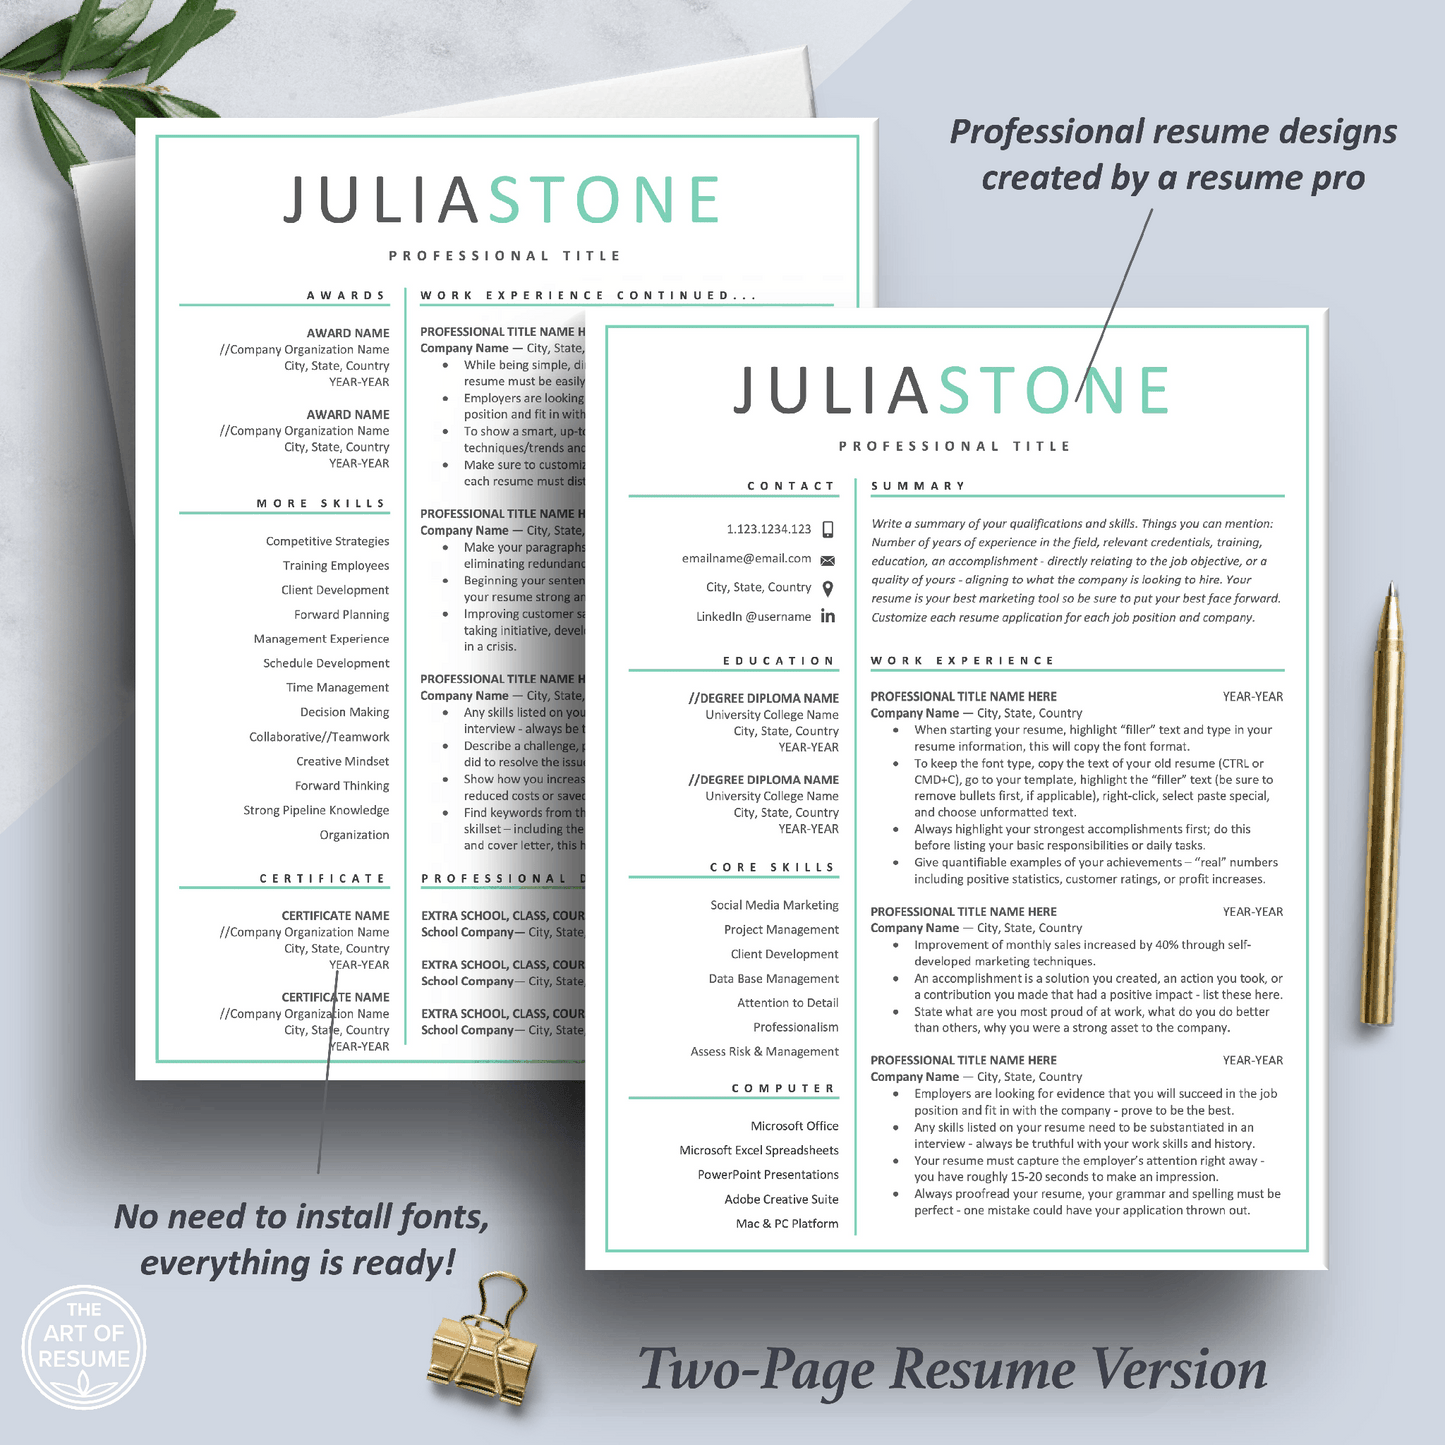 Professional Resume Templates | Free Resume Designs Included (Simple) - The Art of Resume